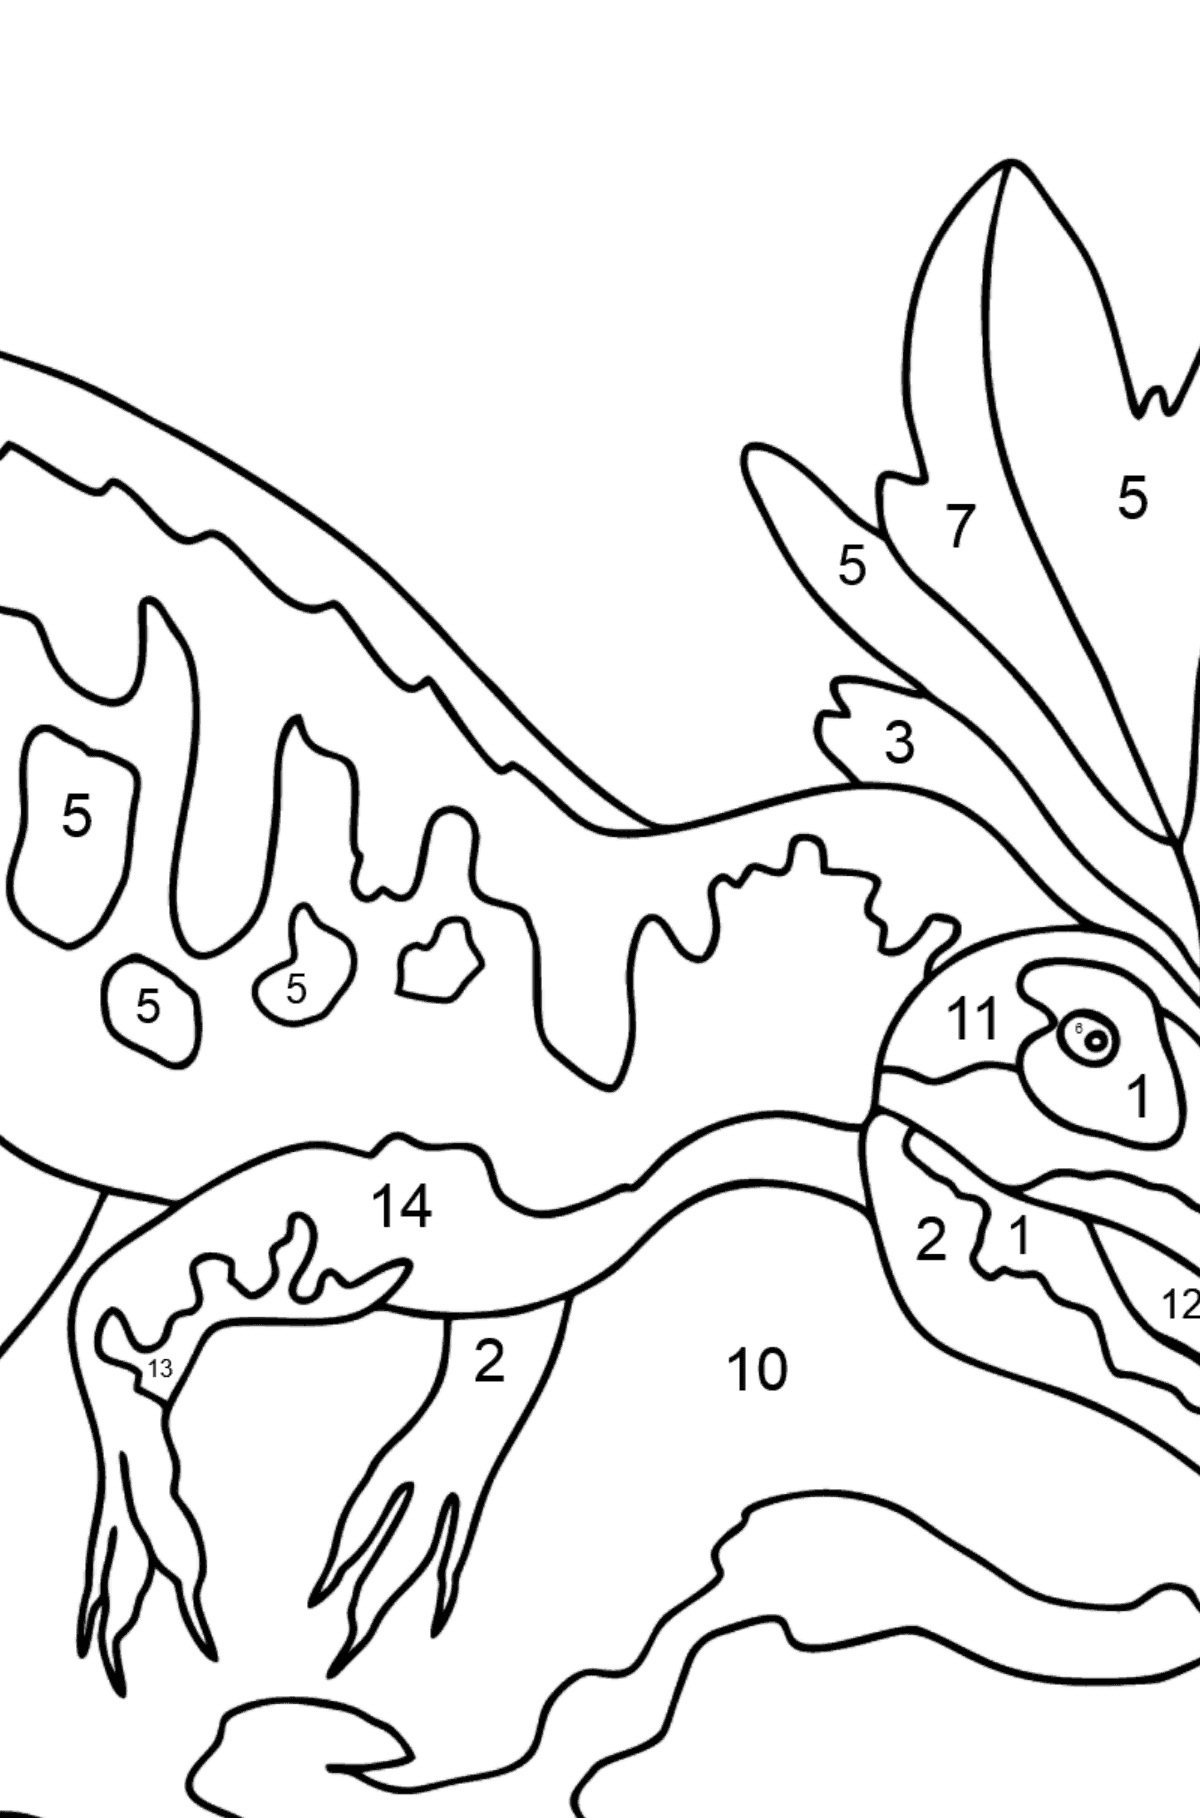 Coloring Page - Allosaurus - A Well-Researched Dinosaur - Coloring by Numbers for Kids